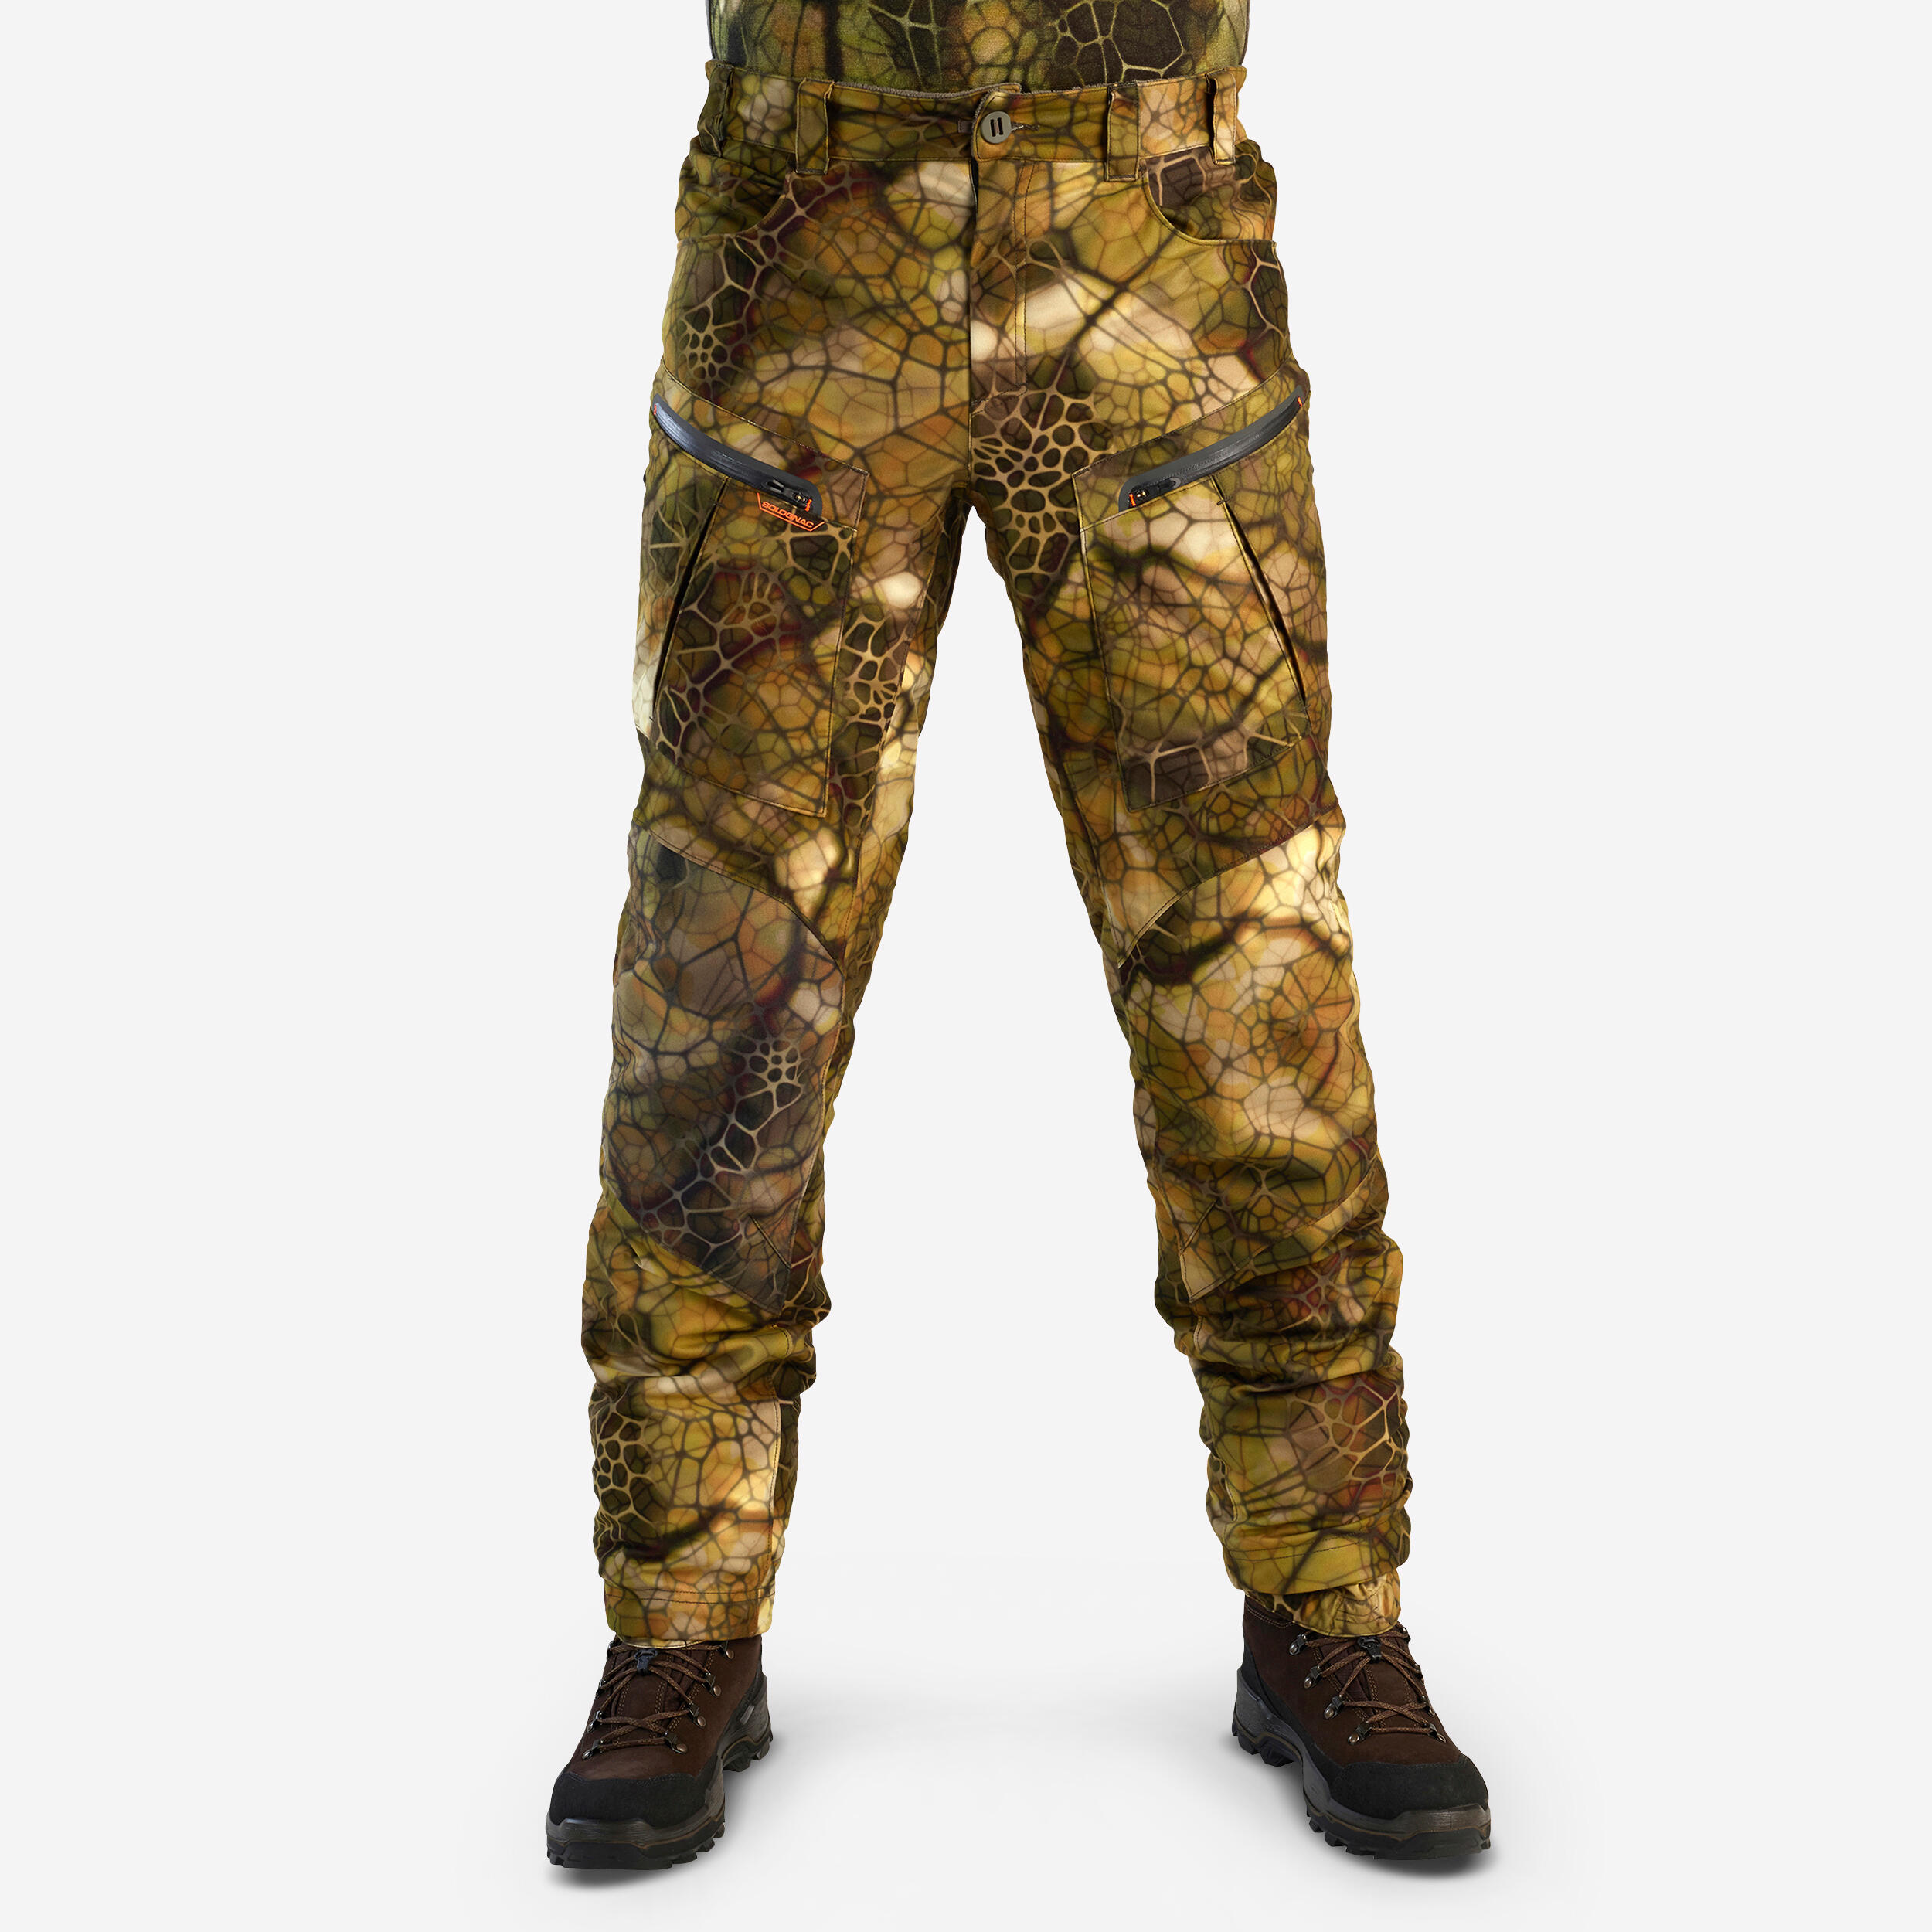 Hunting Silent Warm Waterproof Trousers 900 - Furtiv Camouflage - SOLOGNAC